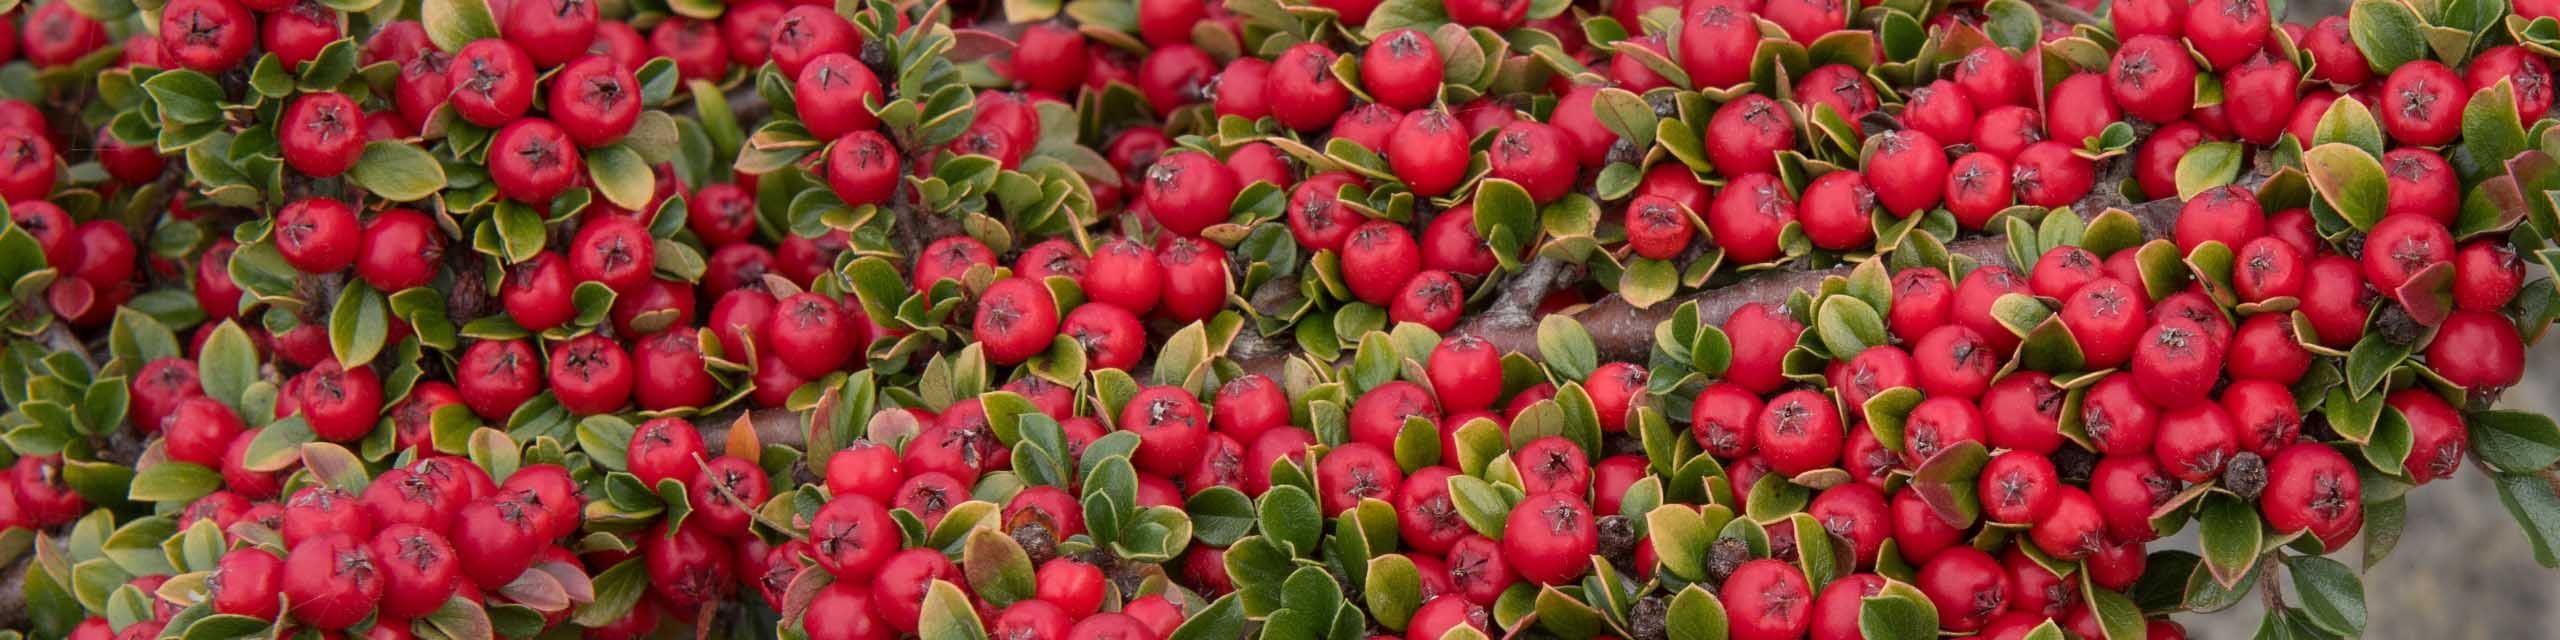 Red berries of a cotoneaster shrub.